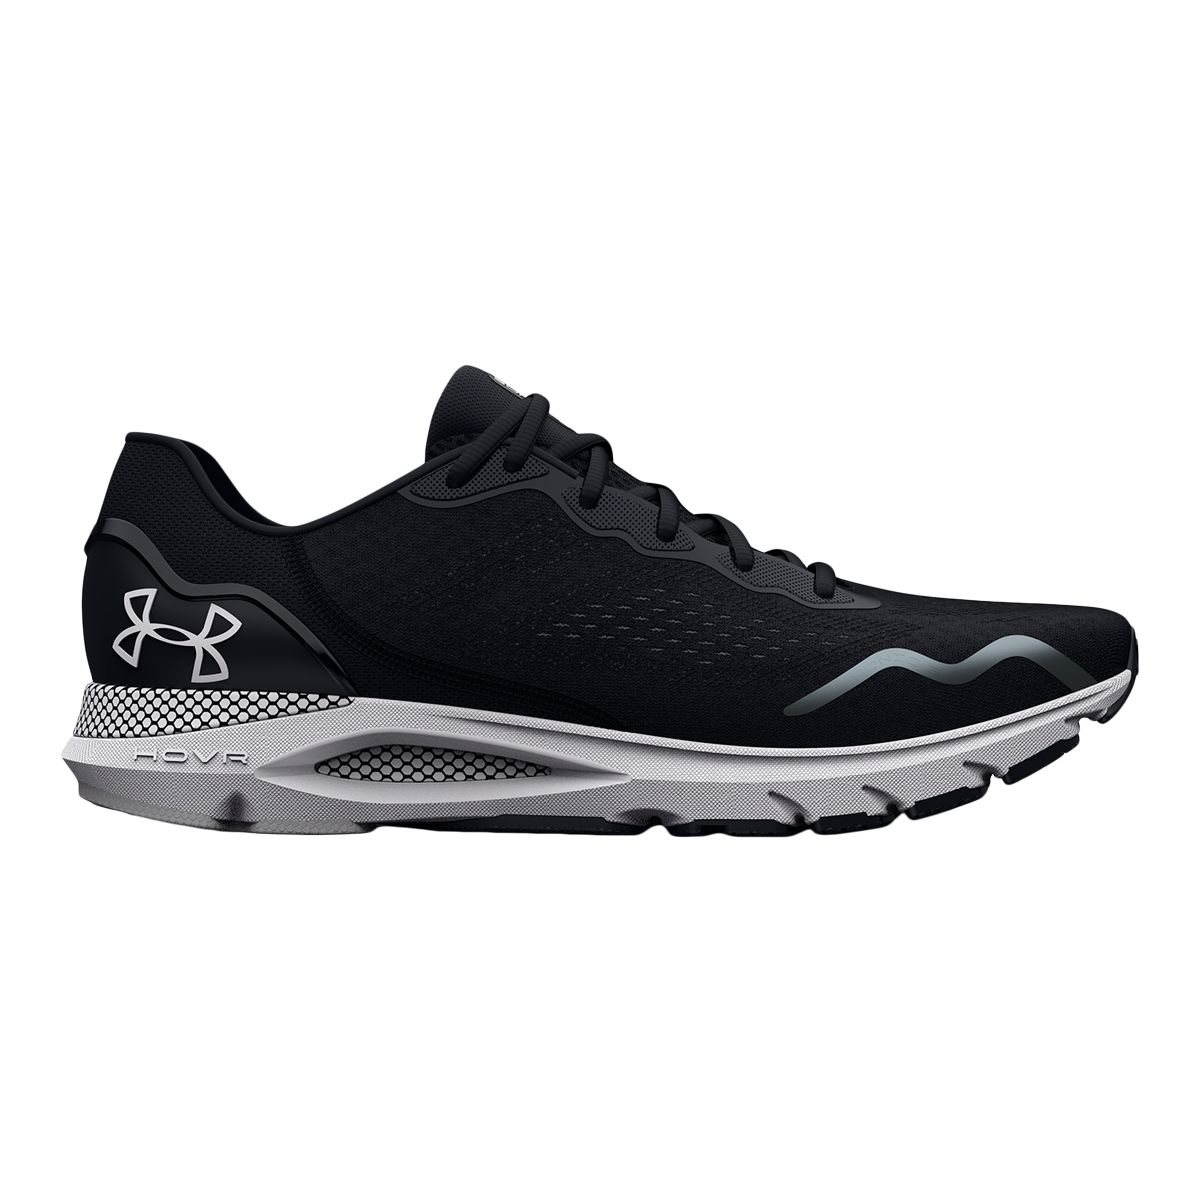 Under Armour Women's Hovr™ Sonic 6 Running Shoes